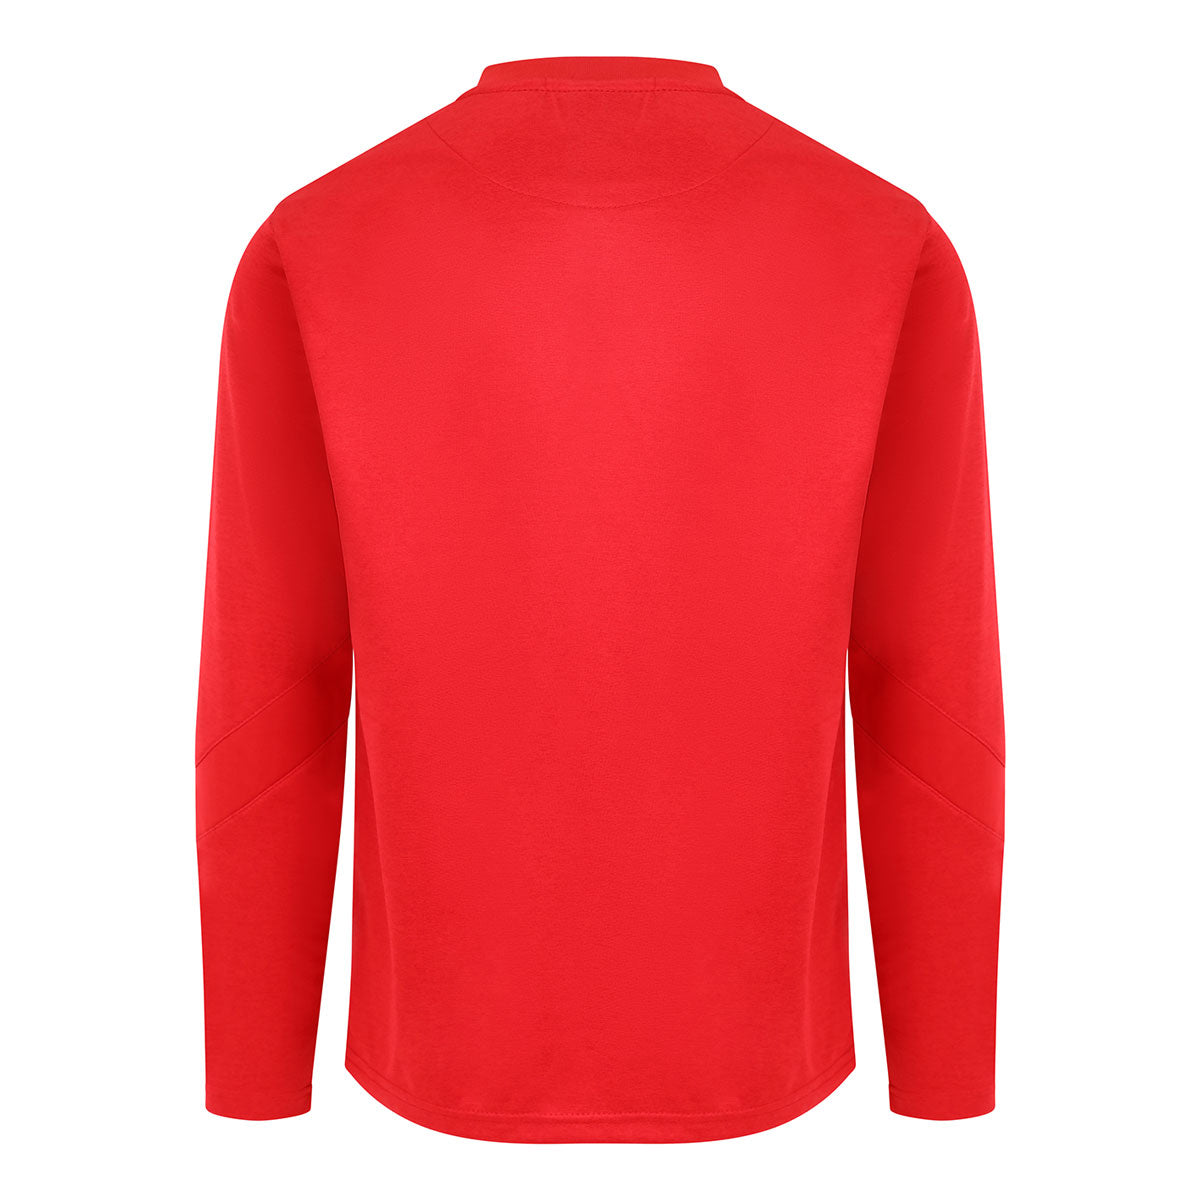 Mc Keever Trinity College Dublin Core 22 Sweat Top - Youth - Red